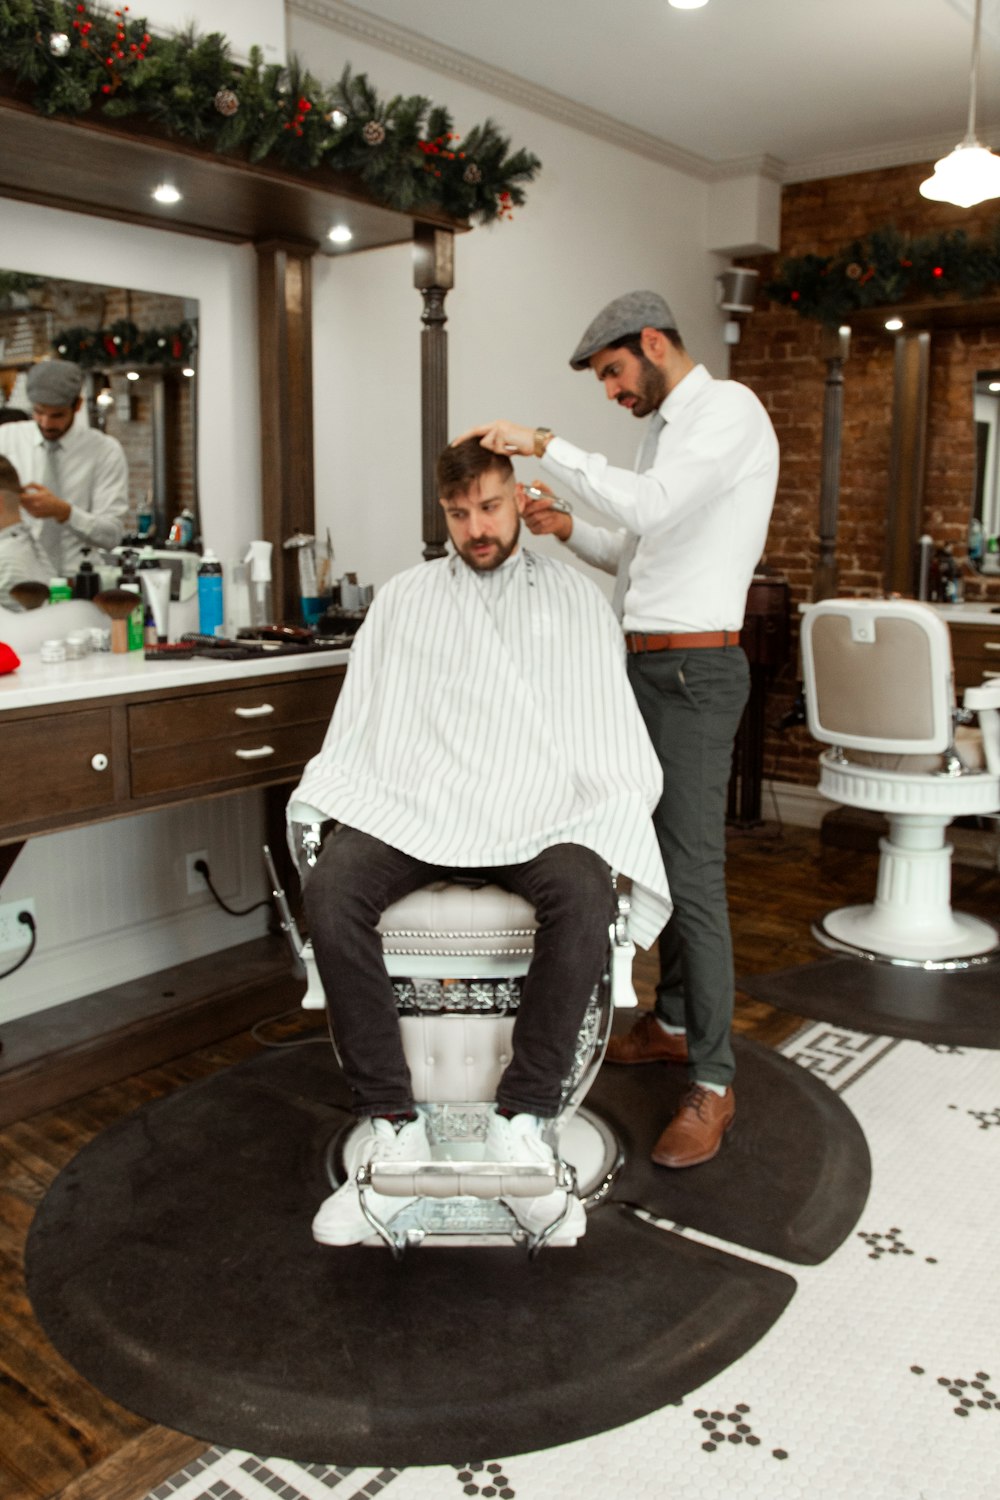 man in white dress shirt sitting on barber chair